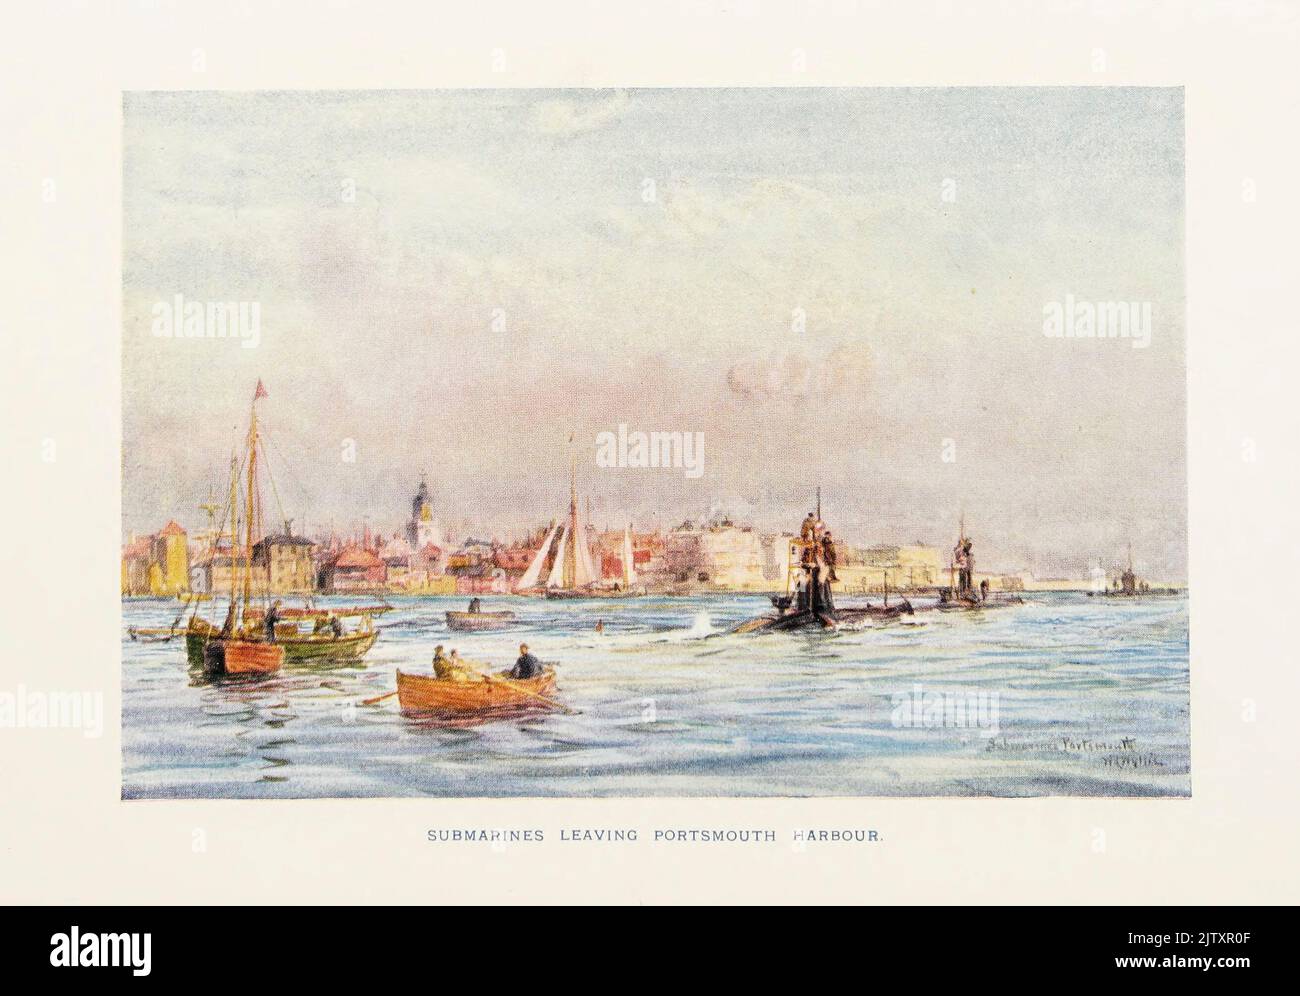 SUBMARINES LEAVING PORTSMOUTH HARBOUR from pictures by William Lionel Wyllie in the book ' The British battle fleet : its inception and growth throughout the centuries to the present day ' Volume 2 by Jane, Fred T., 1865-1916 Publication date 1915 Stock Photo